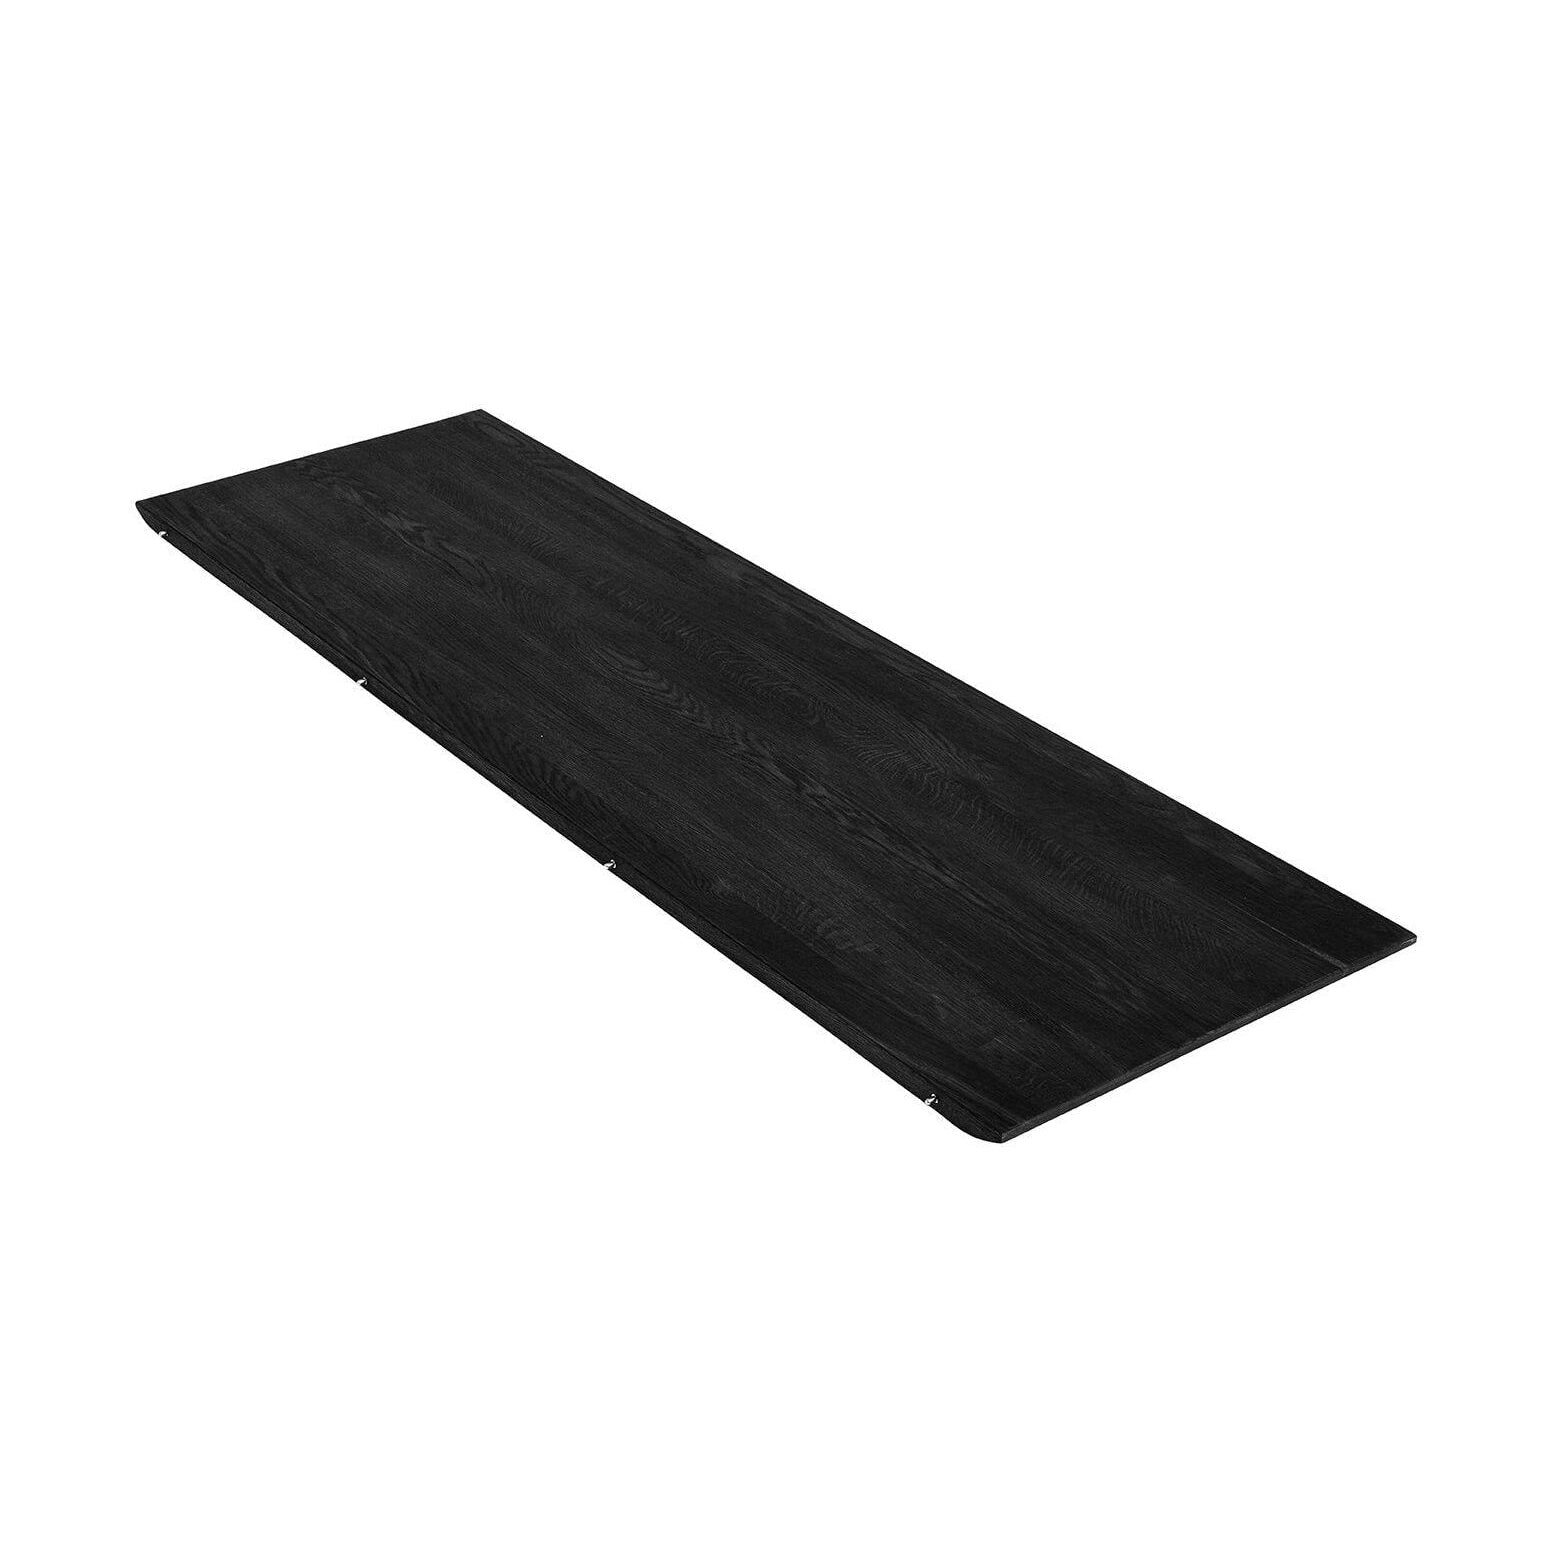 Muubs Space Additional Plate, 150 Cm